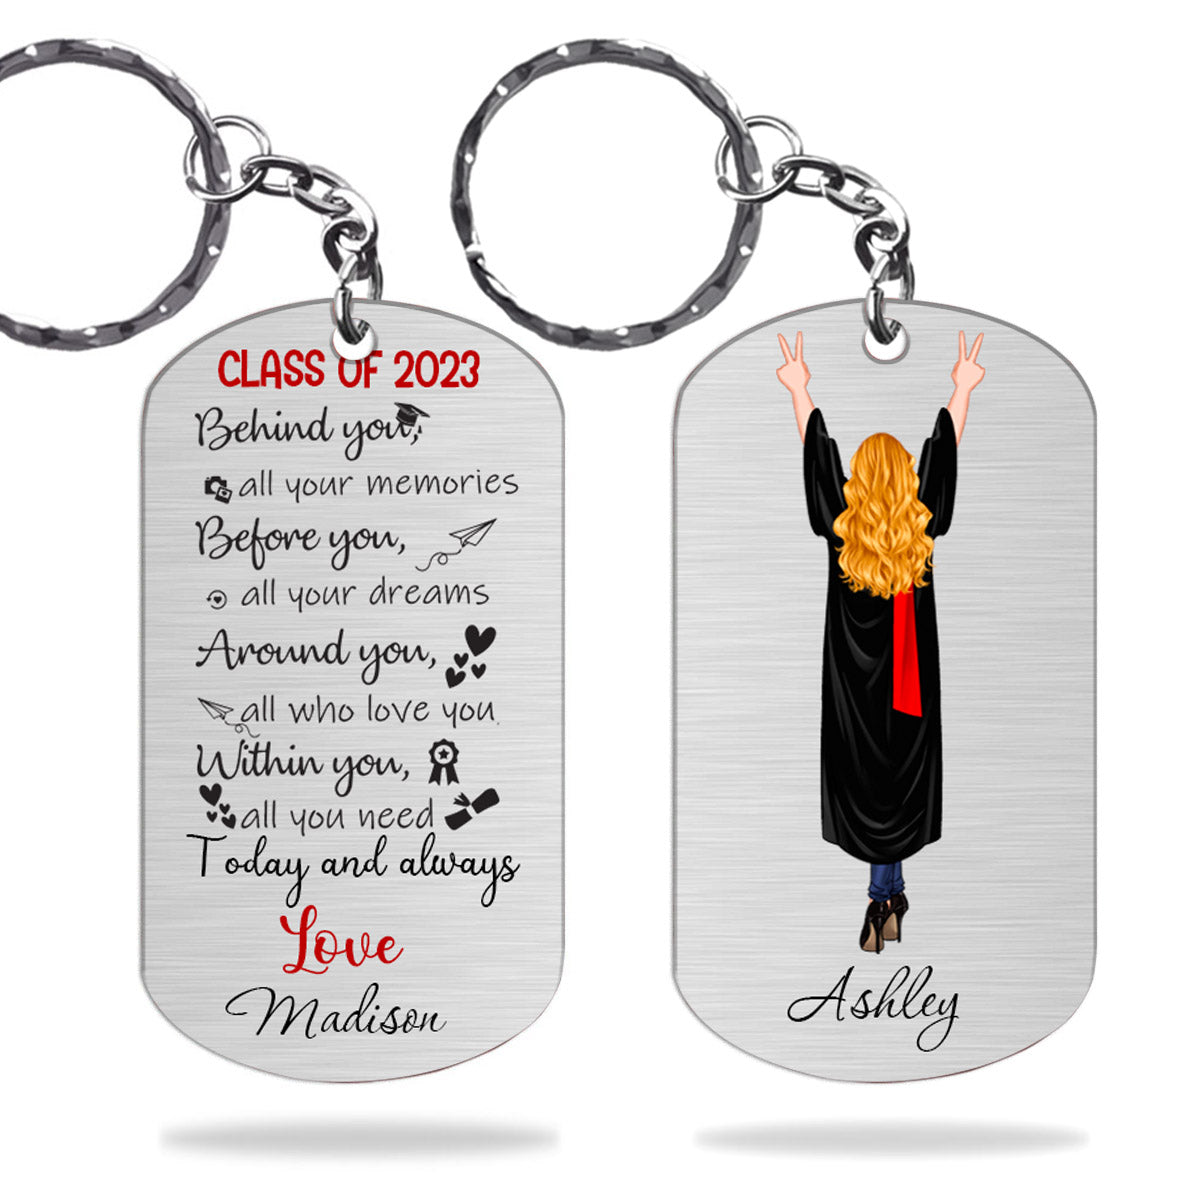 Discover Class Of 2023 - Personalized Graduation Stainless Steel Keychain